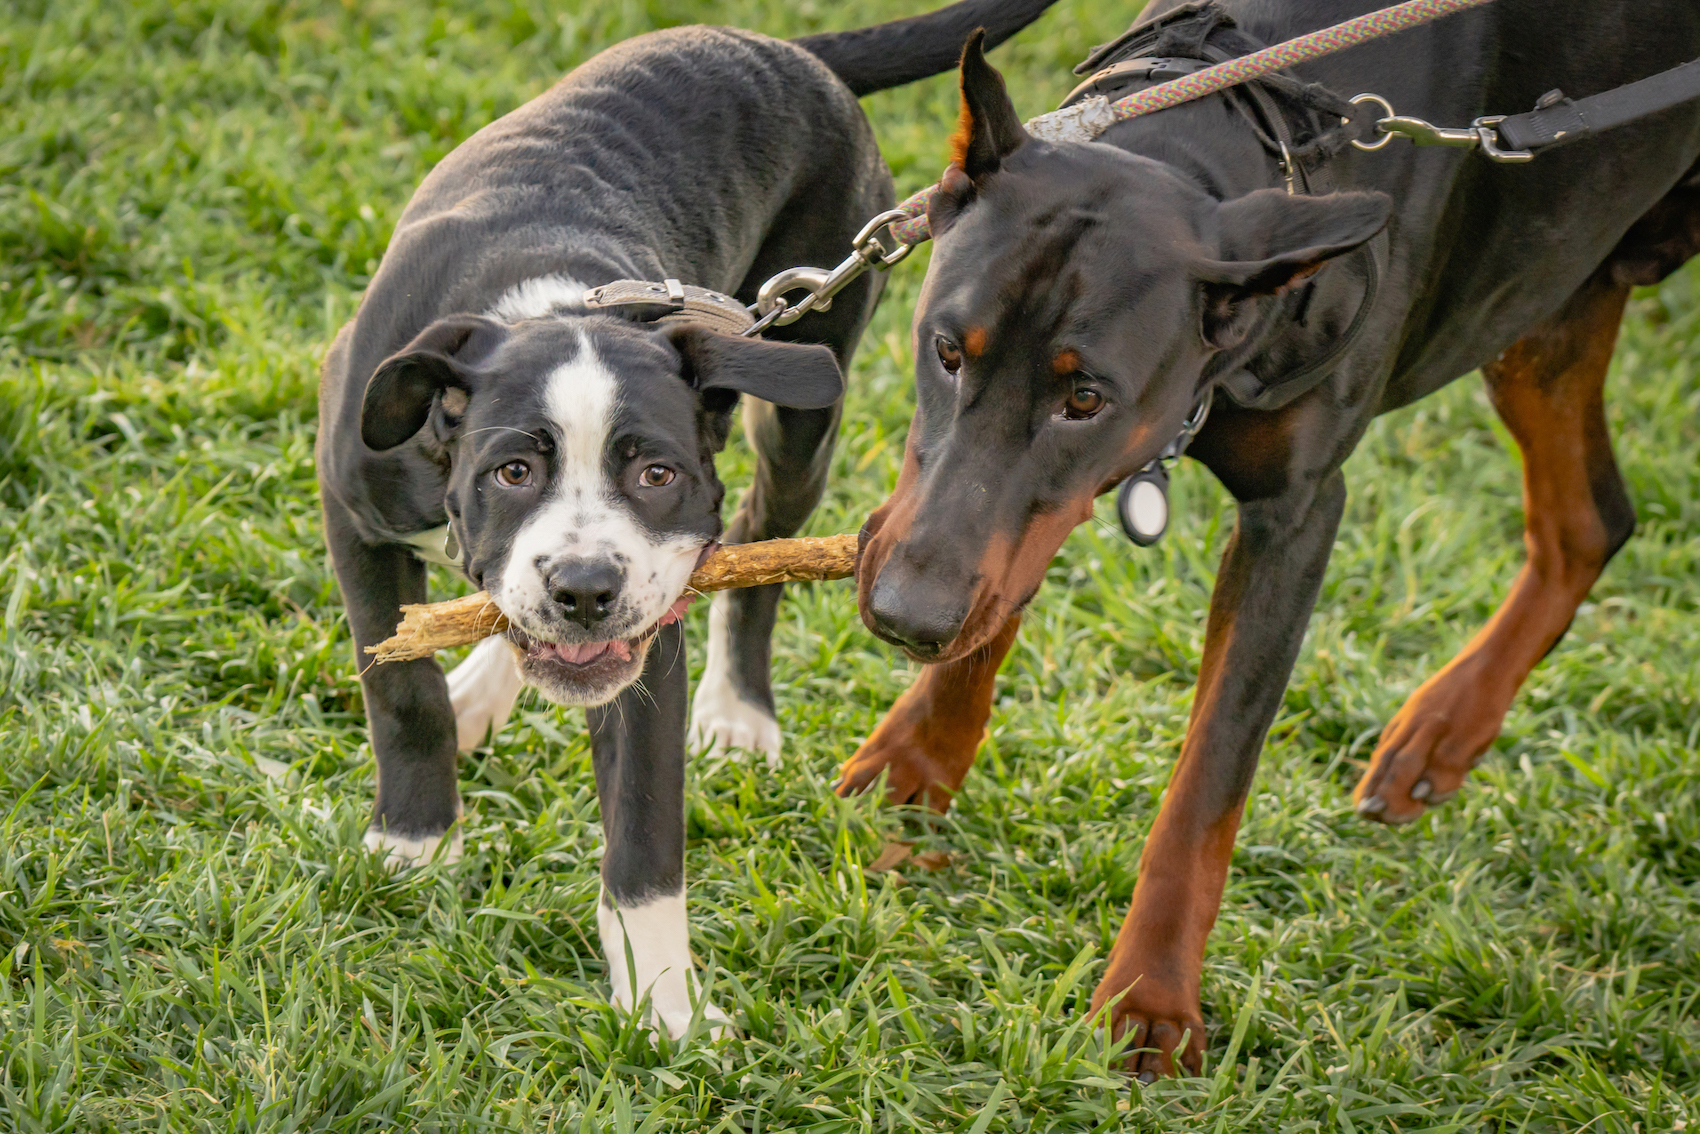 Two dogs play with a stick in the grass